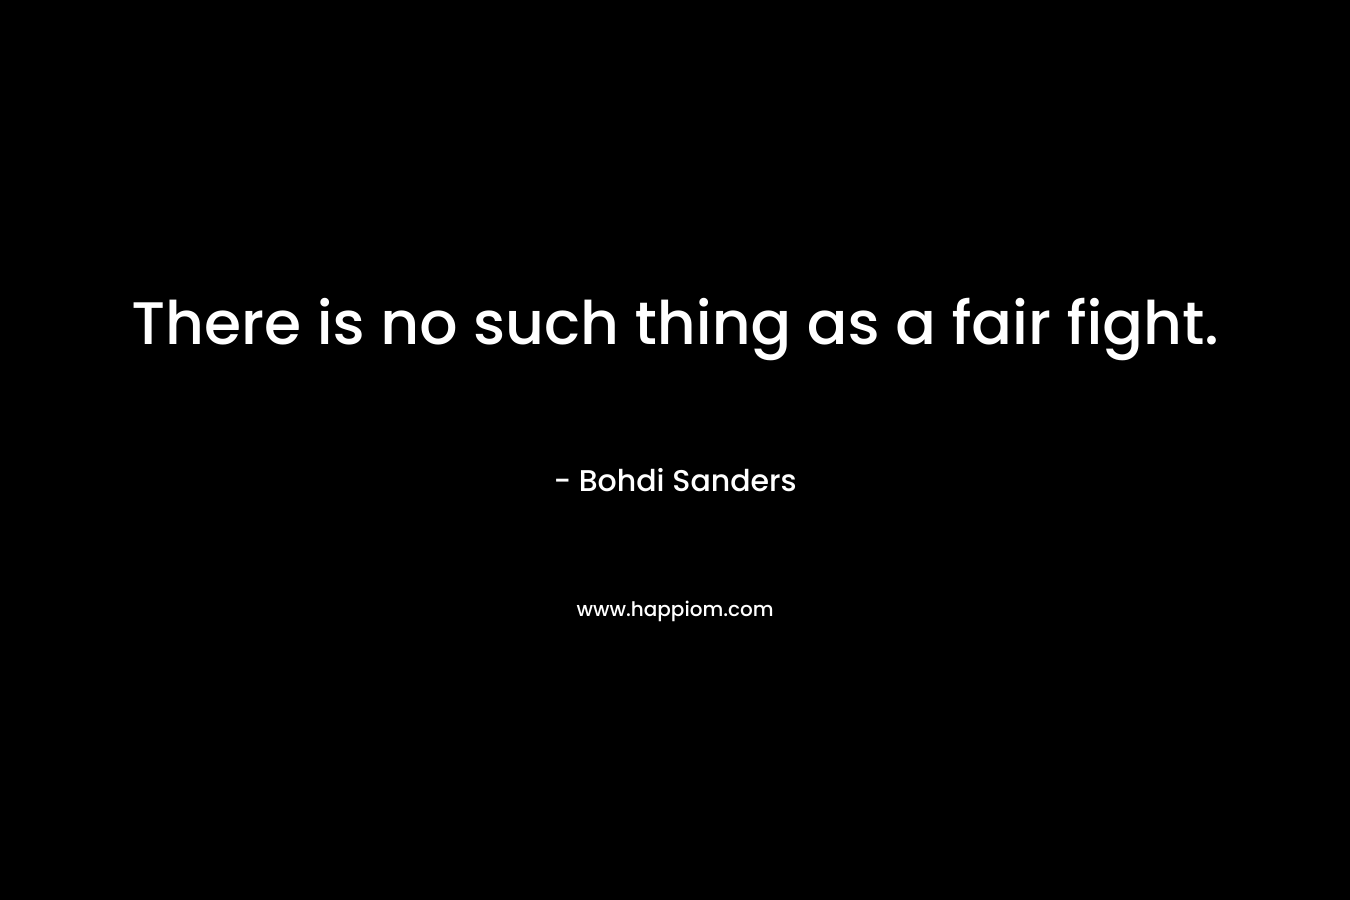 There is no such thing as a fair fight.